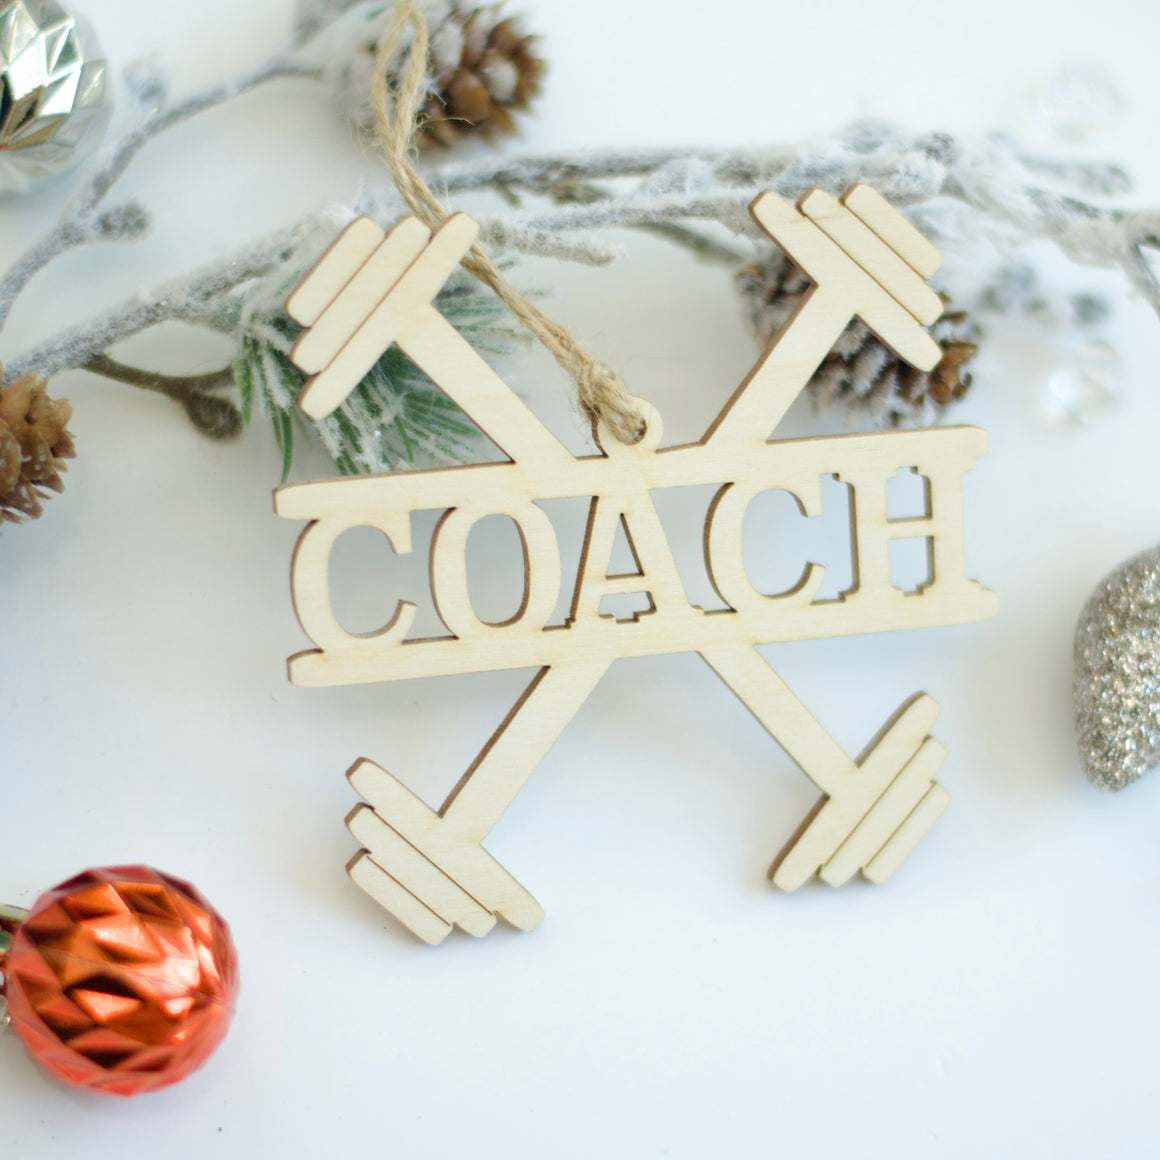 Crossfit Coach Christmas Gift, Christmas Tree Ornament Appreciation Gift for Crossfit Coach